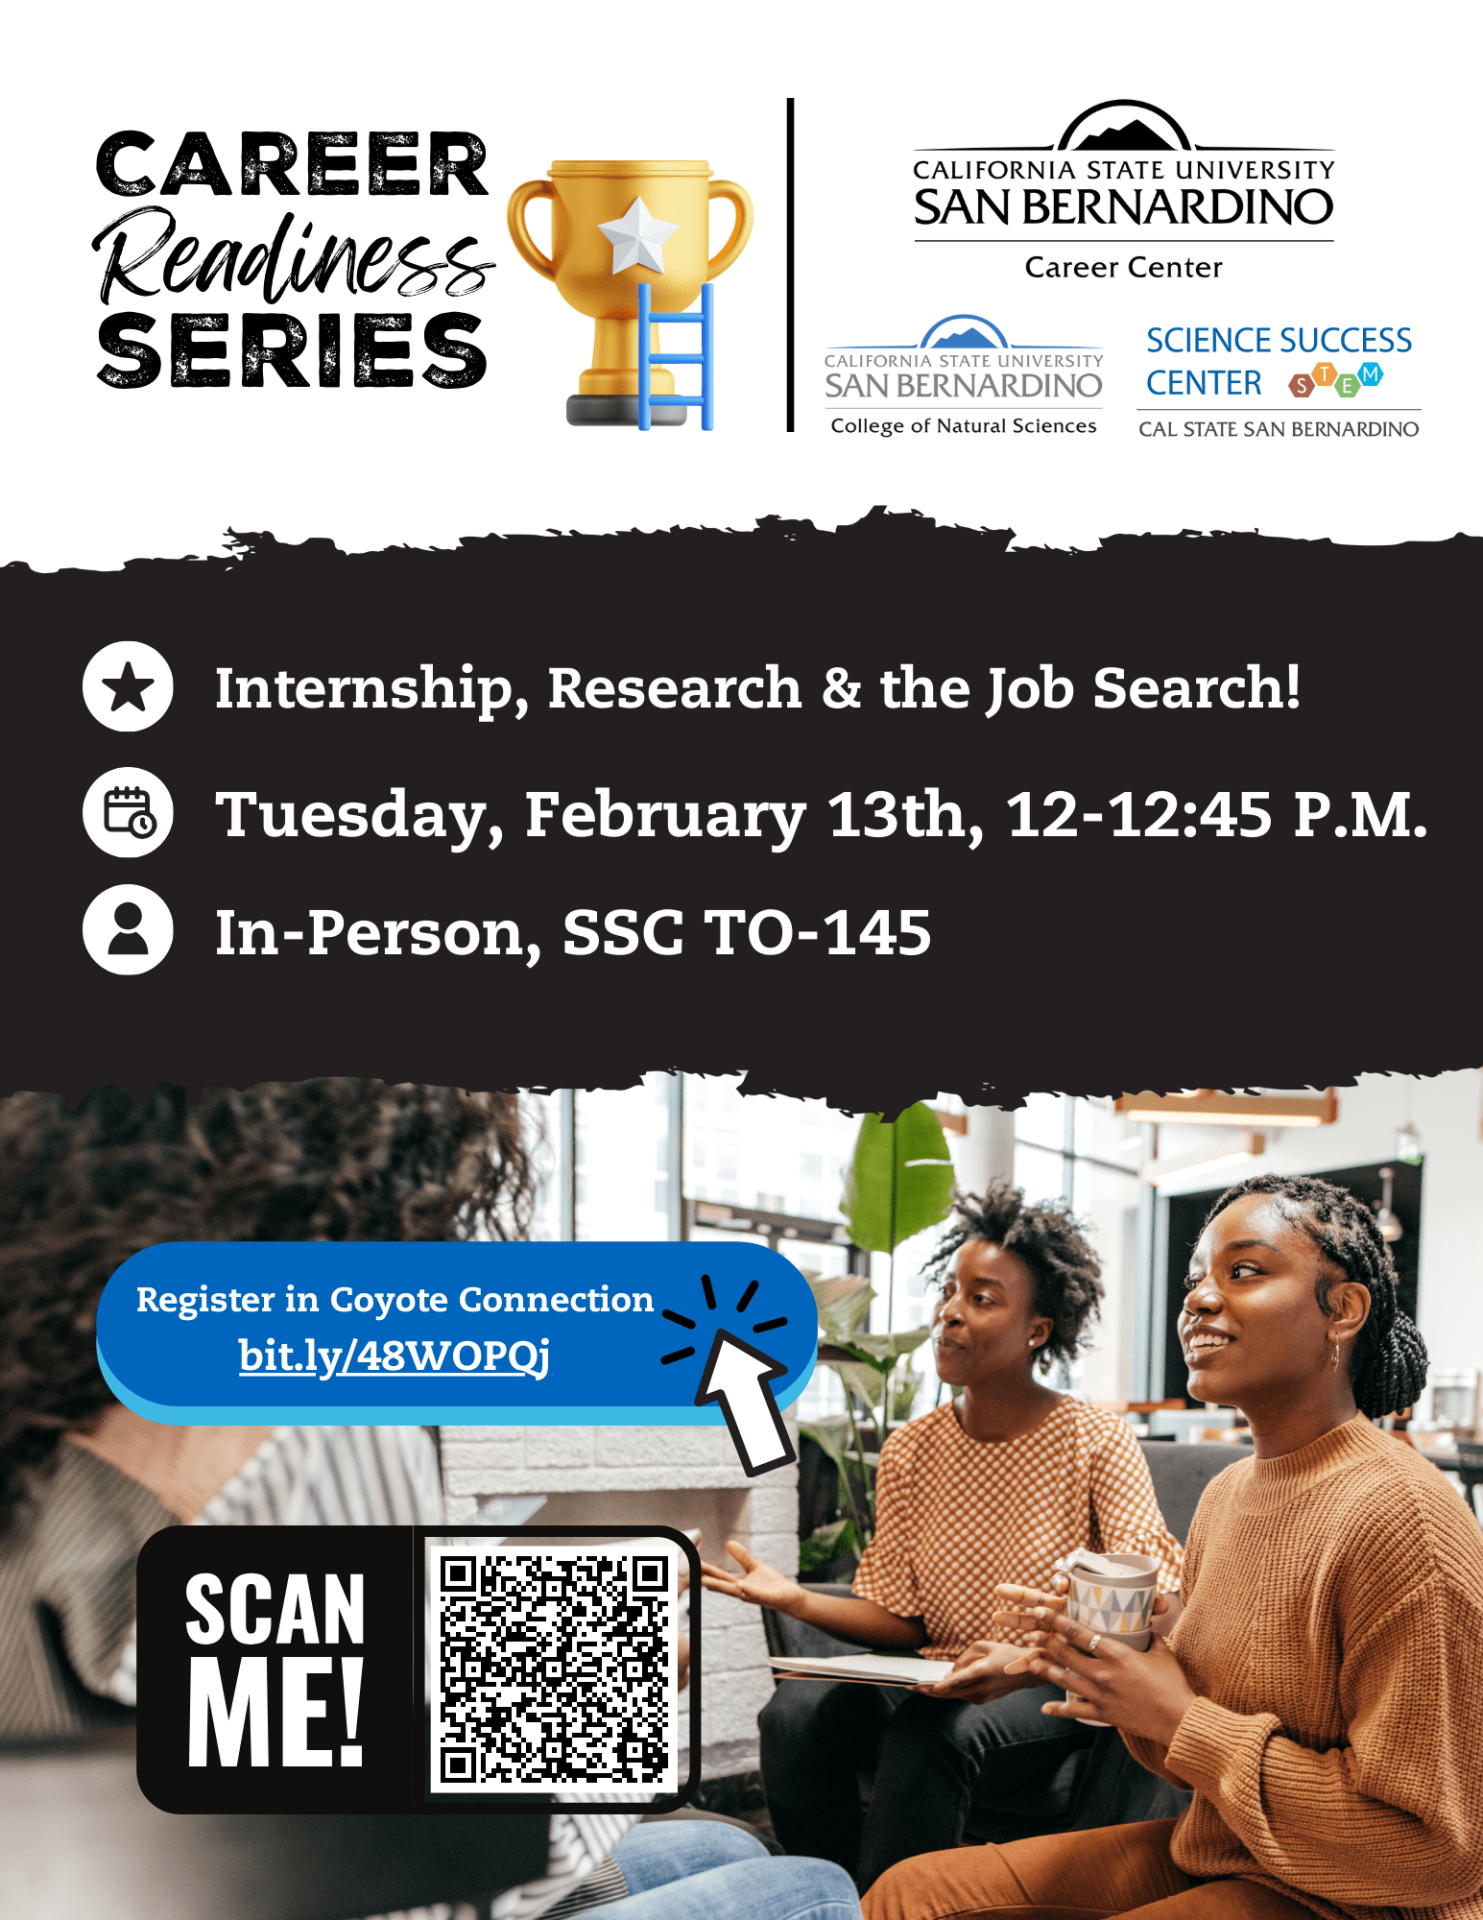 Internship, Research & the Job Search! workshop on Tuesday, February 13th, 12-12:45 P.M. In-Person, SSC TO-145